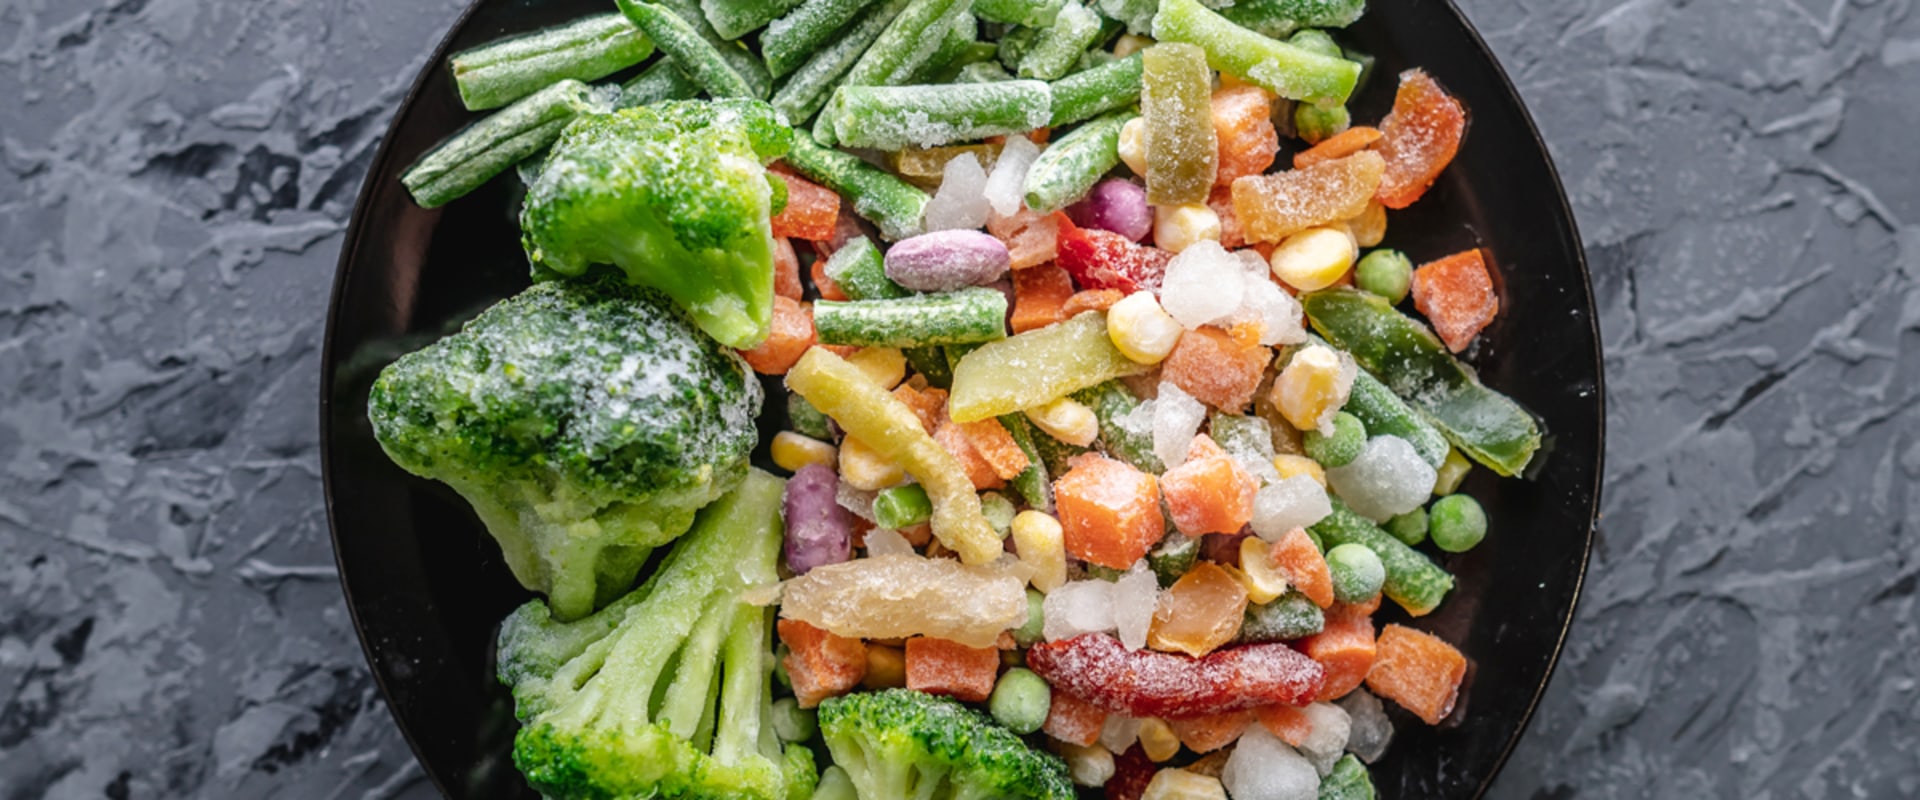 Should You Include Frozen Foods in Your Grocery Shopping List?